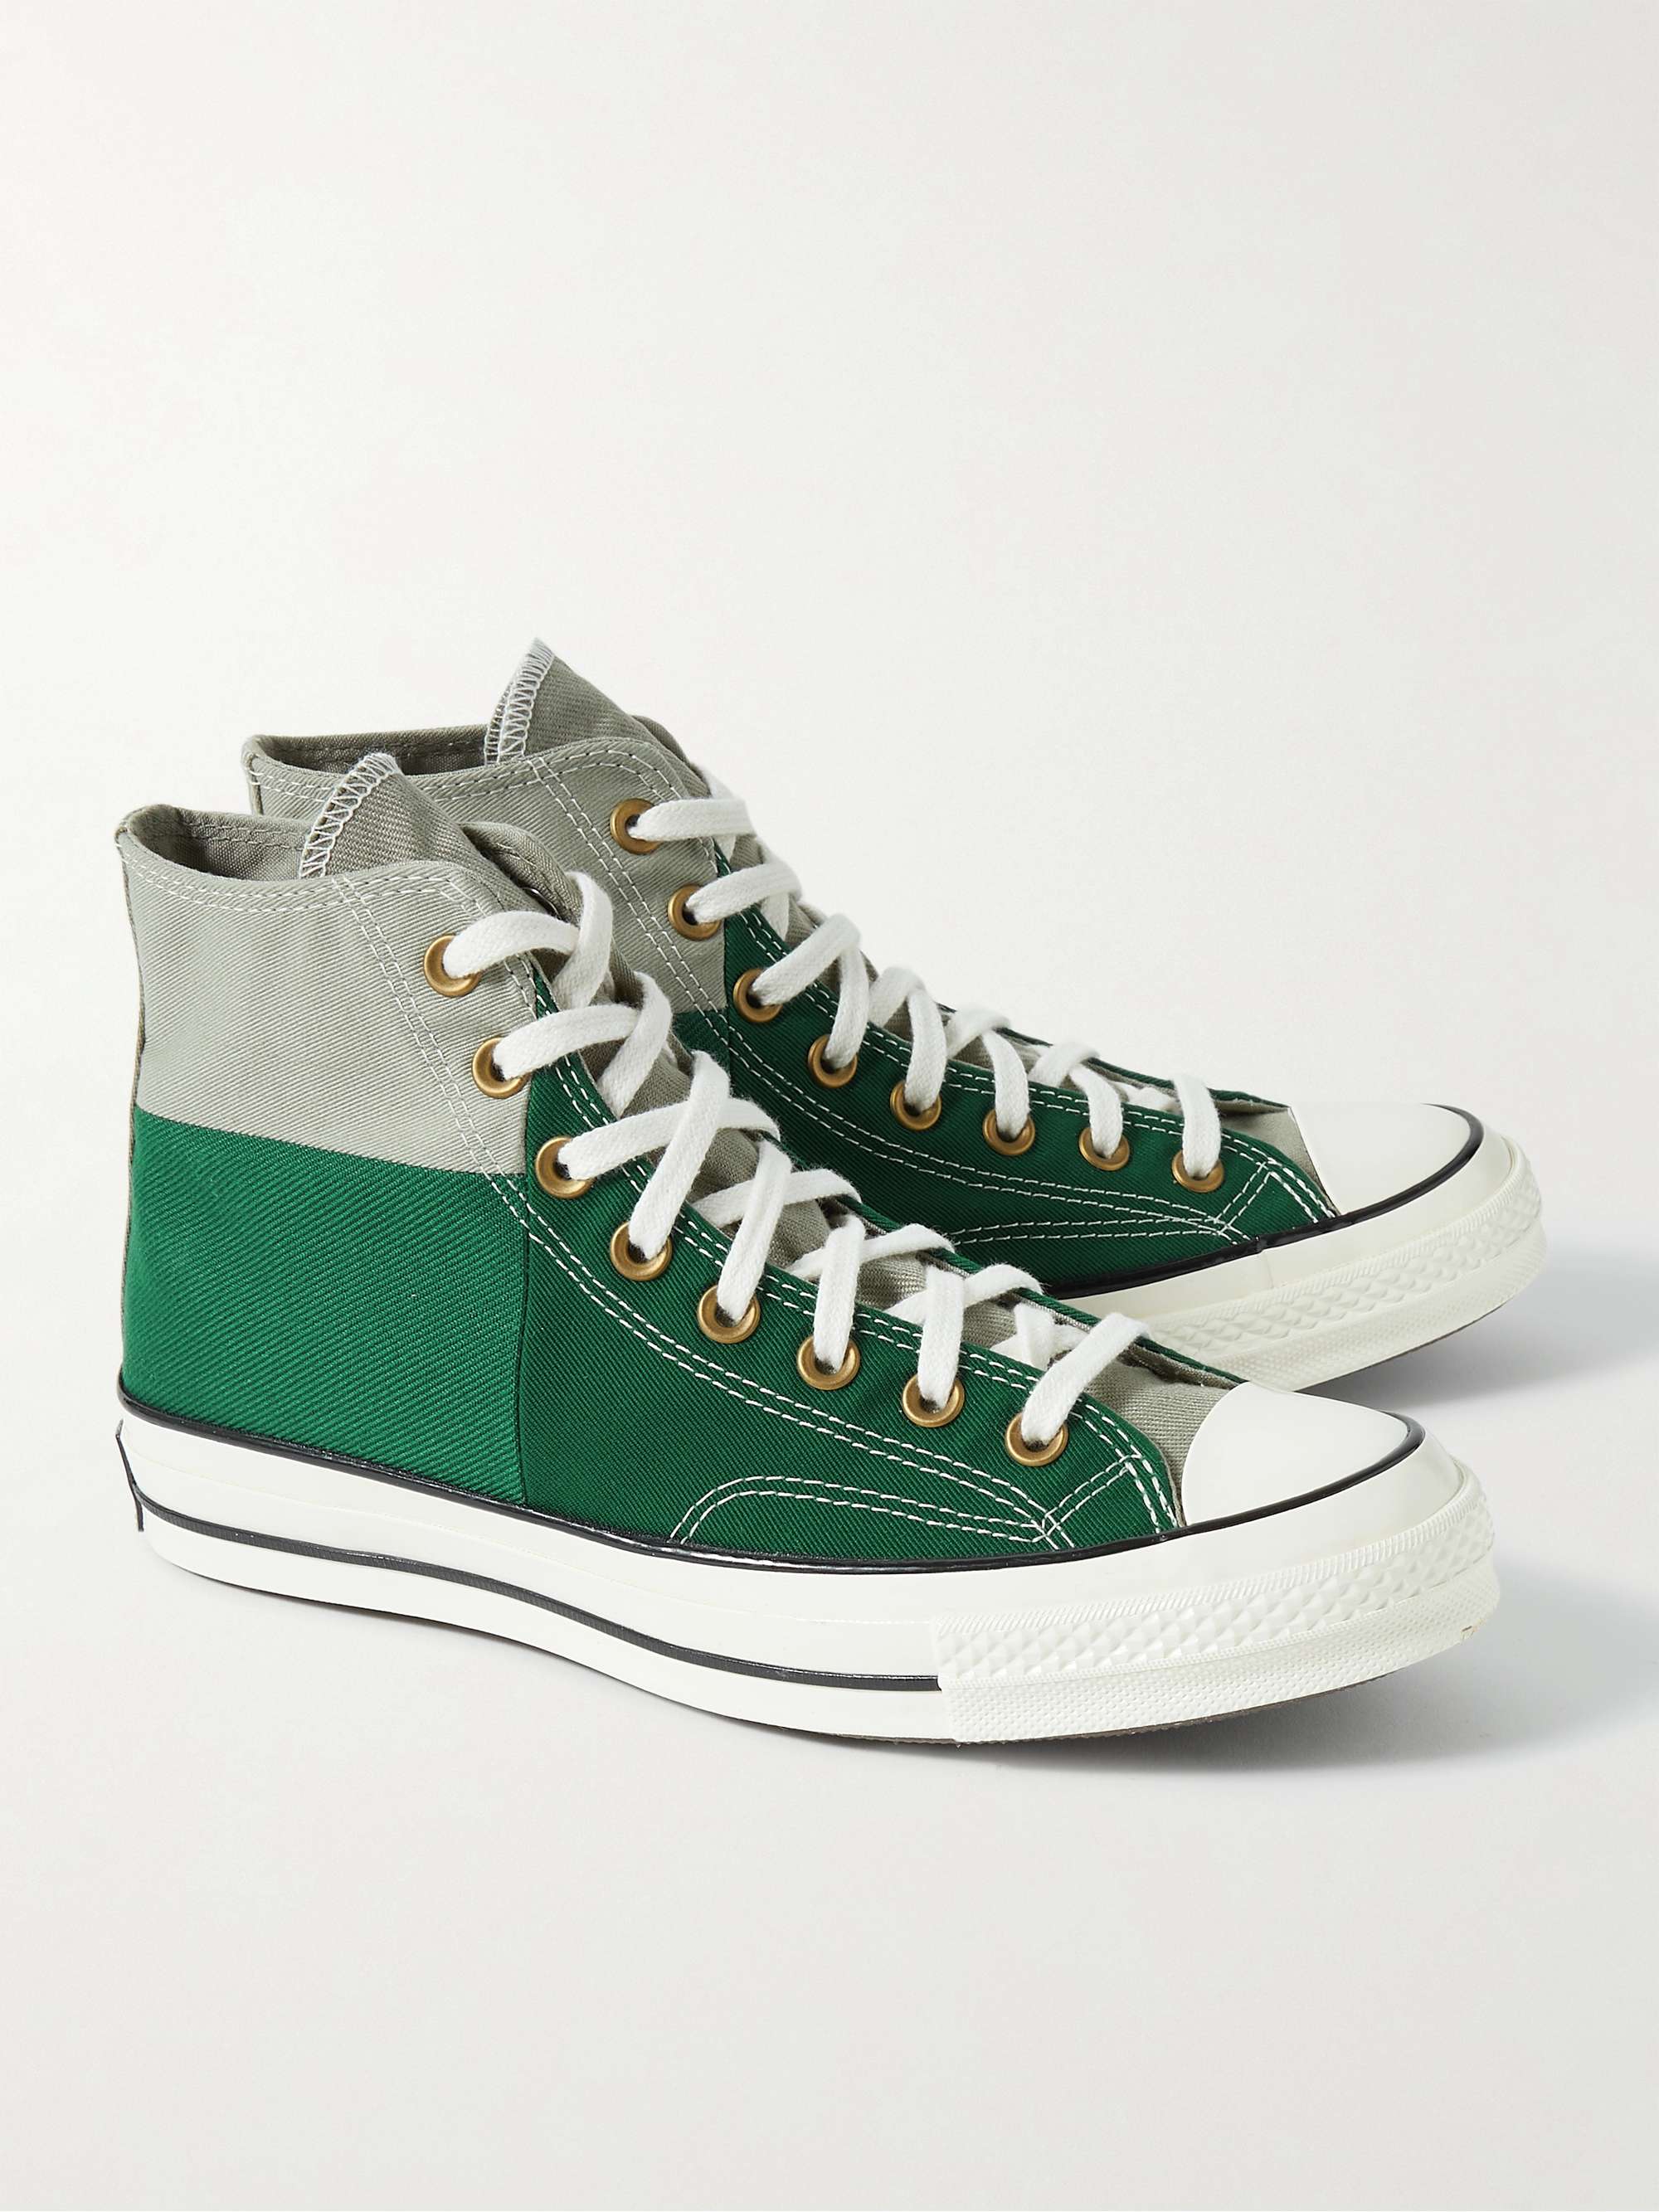 CONVERSE Chuck 70 Colour-Block Recycled Canvas High-Top Sneakers | MR PORTER